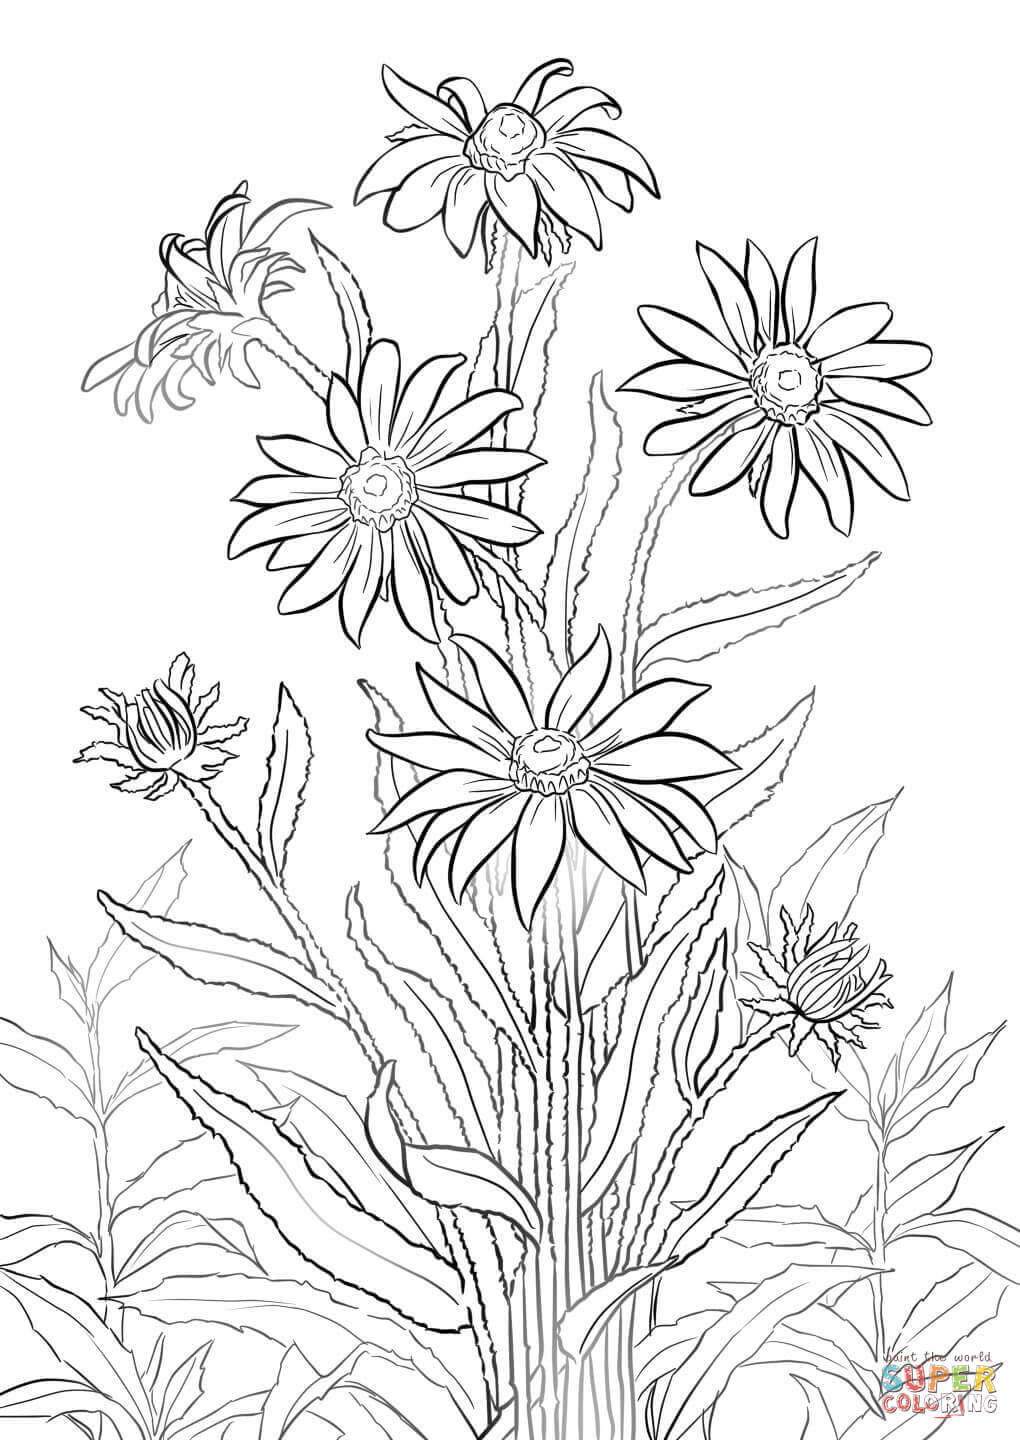 Black-eyed Susan Coloring Pages